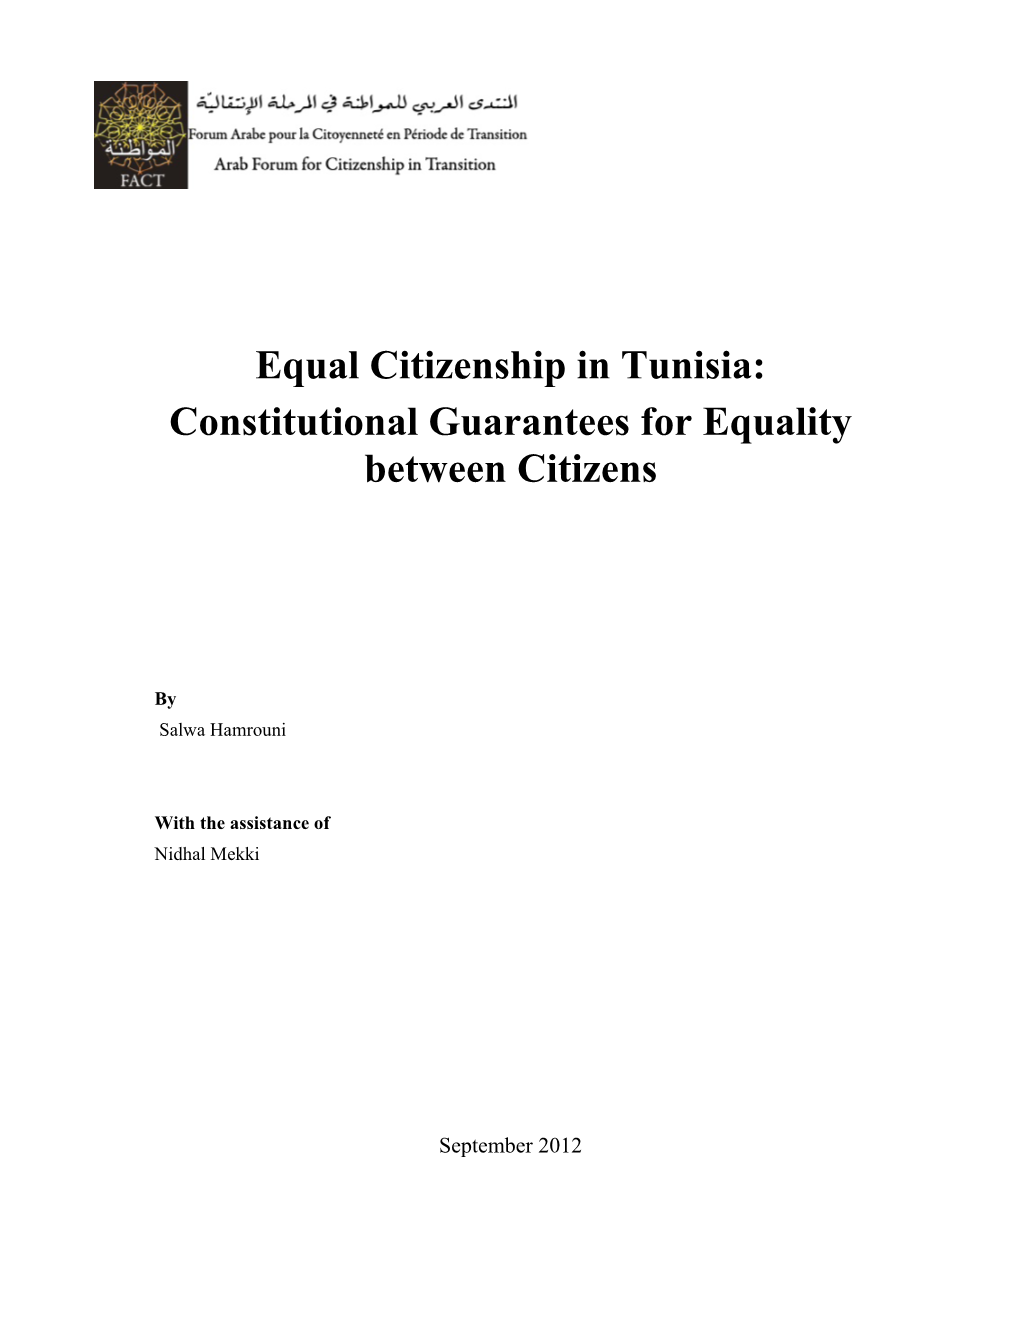 Equal Citizenship in Tunisia: Constitutional Guarantees for Equality Between Citizens